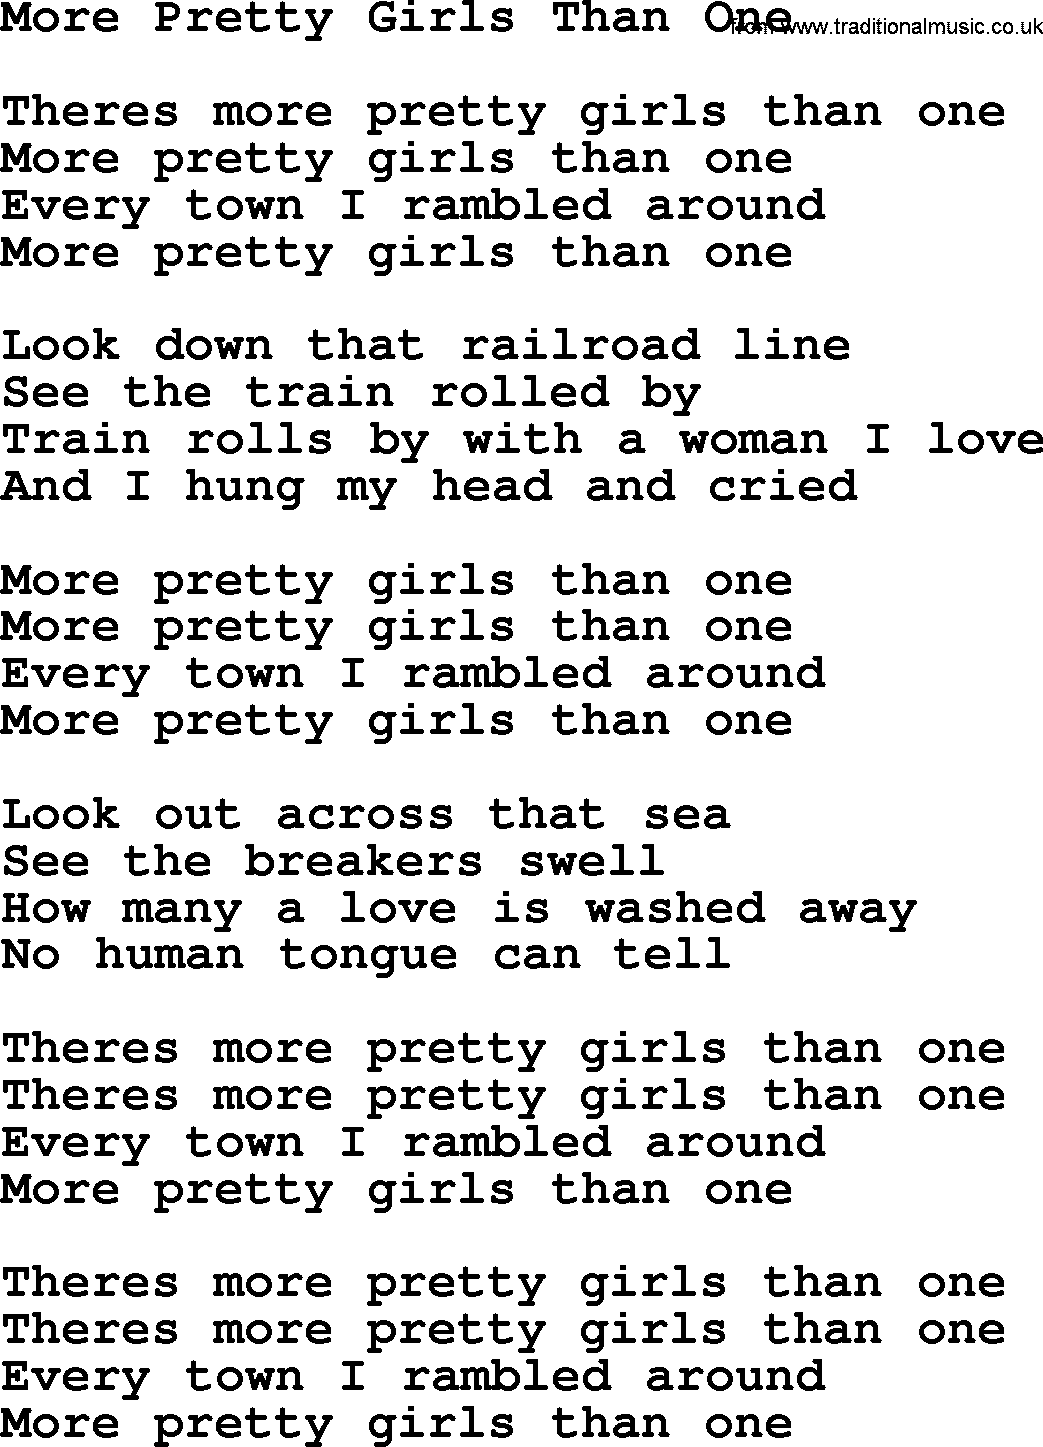 Woody Guthrie song More Pretty Girls Than One lyrics